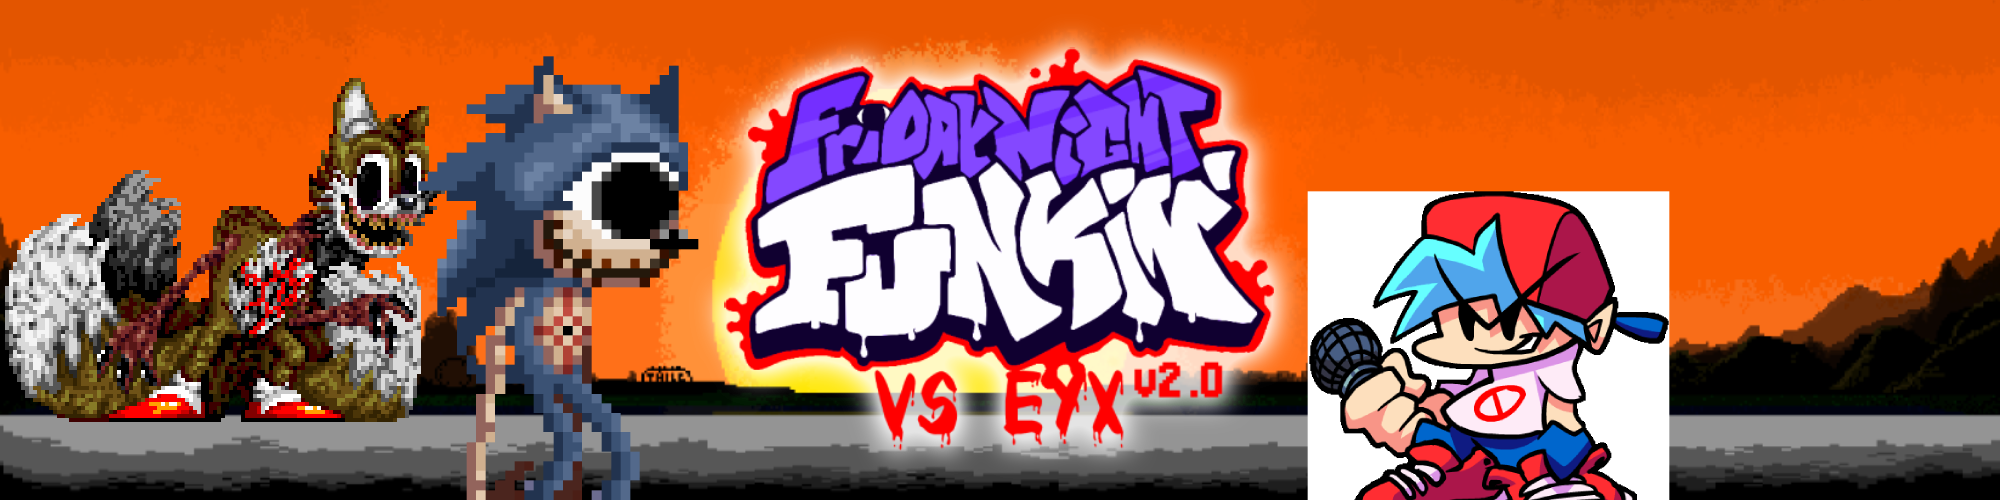 Your Average "FNF vs Eyx" Mod (v2.0 Coming Soon)